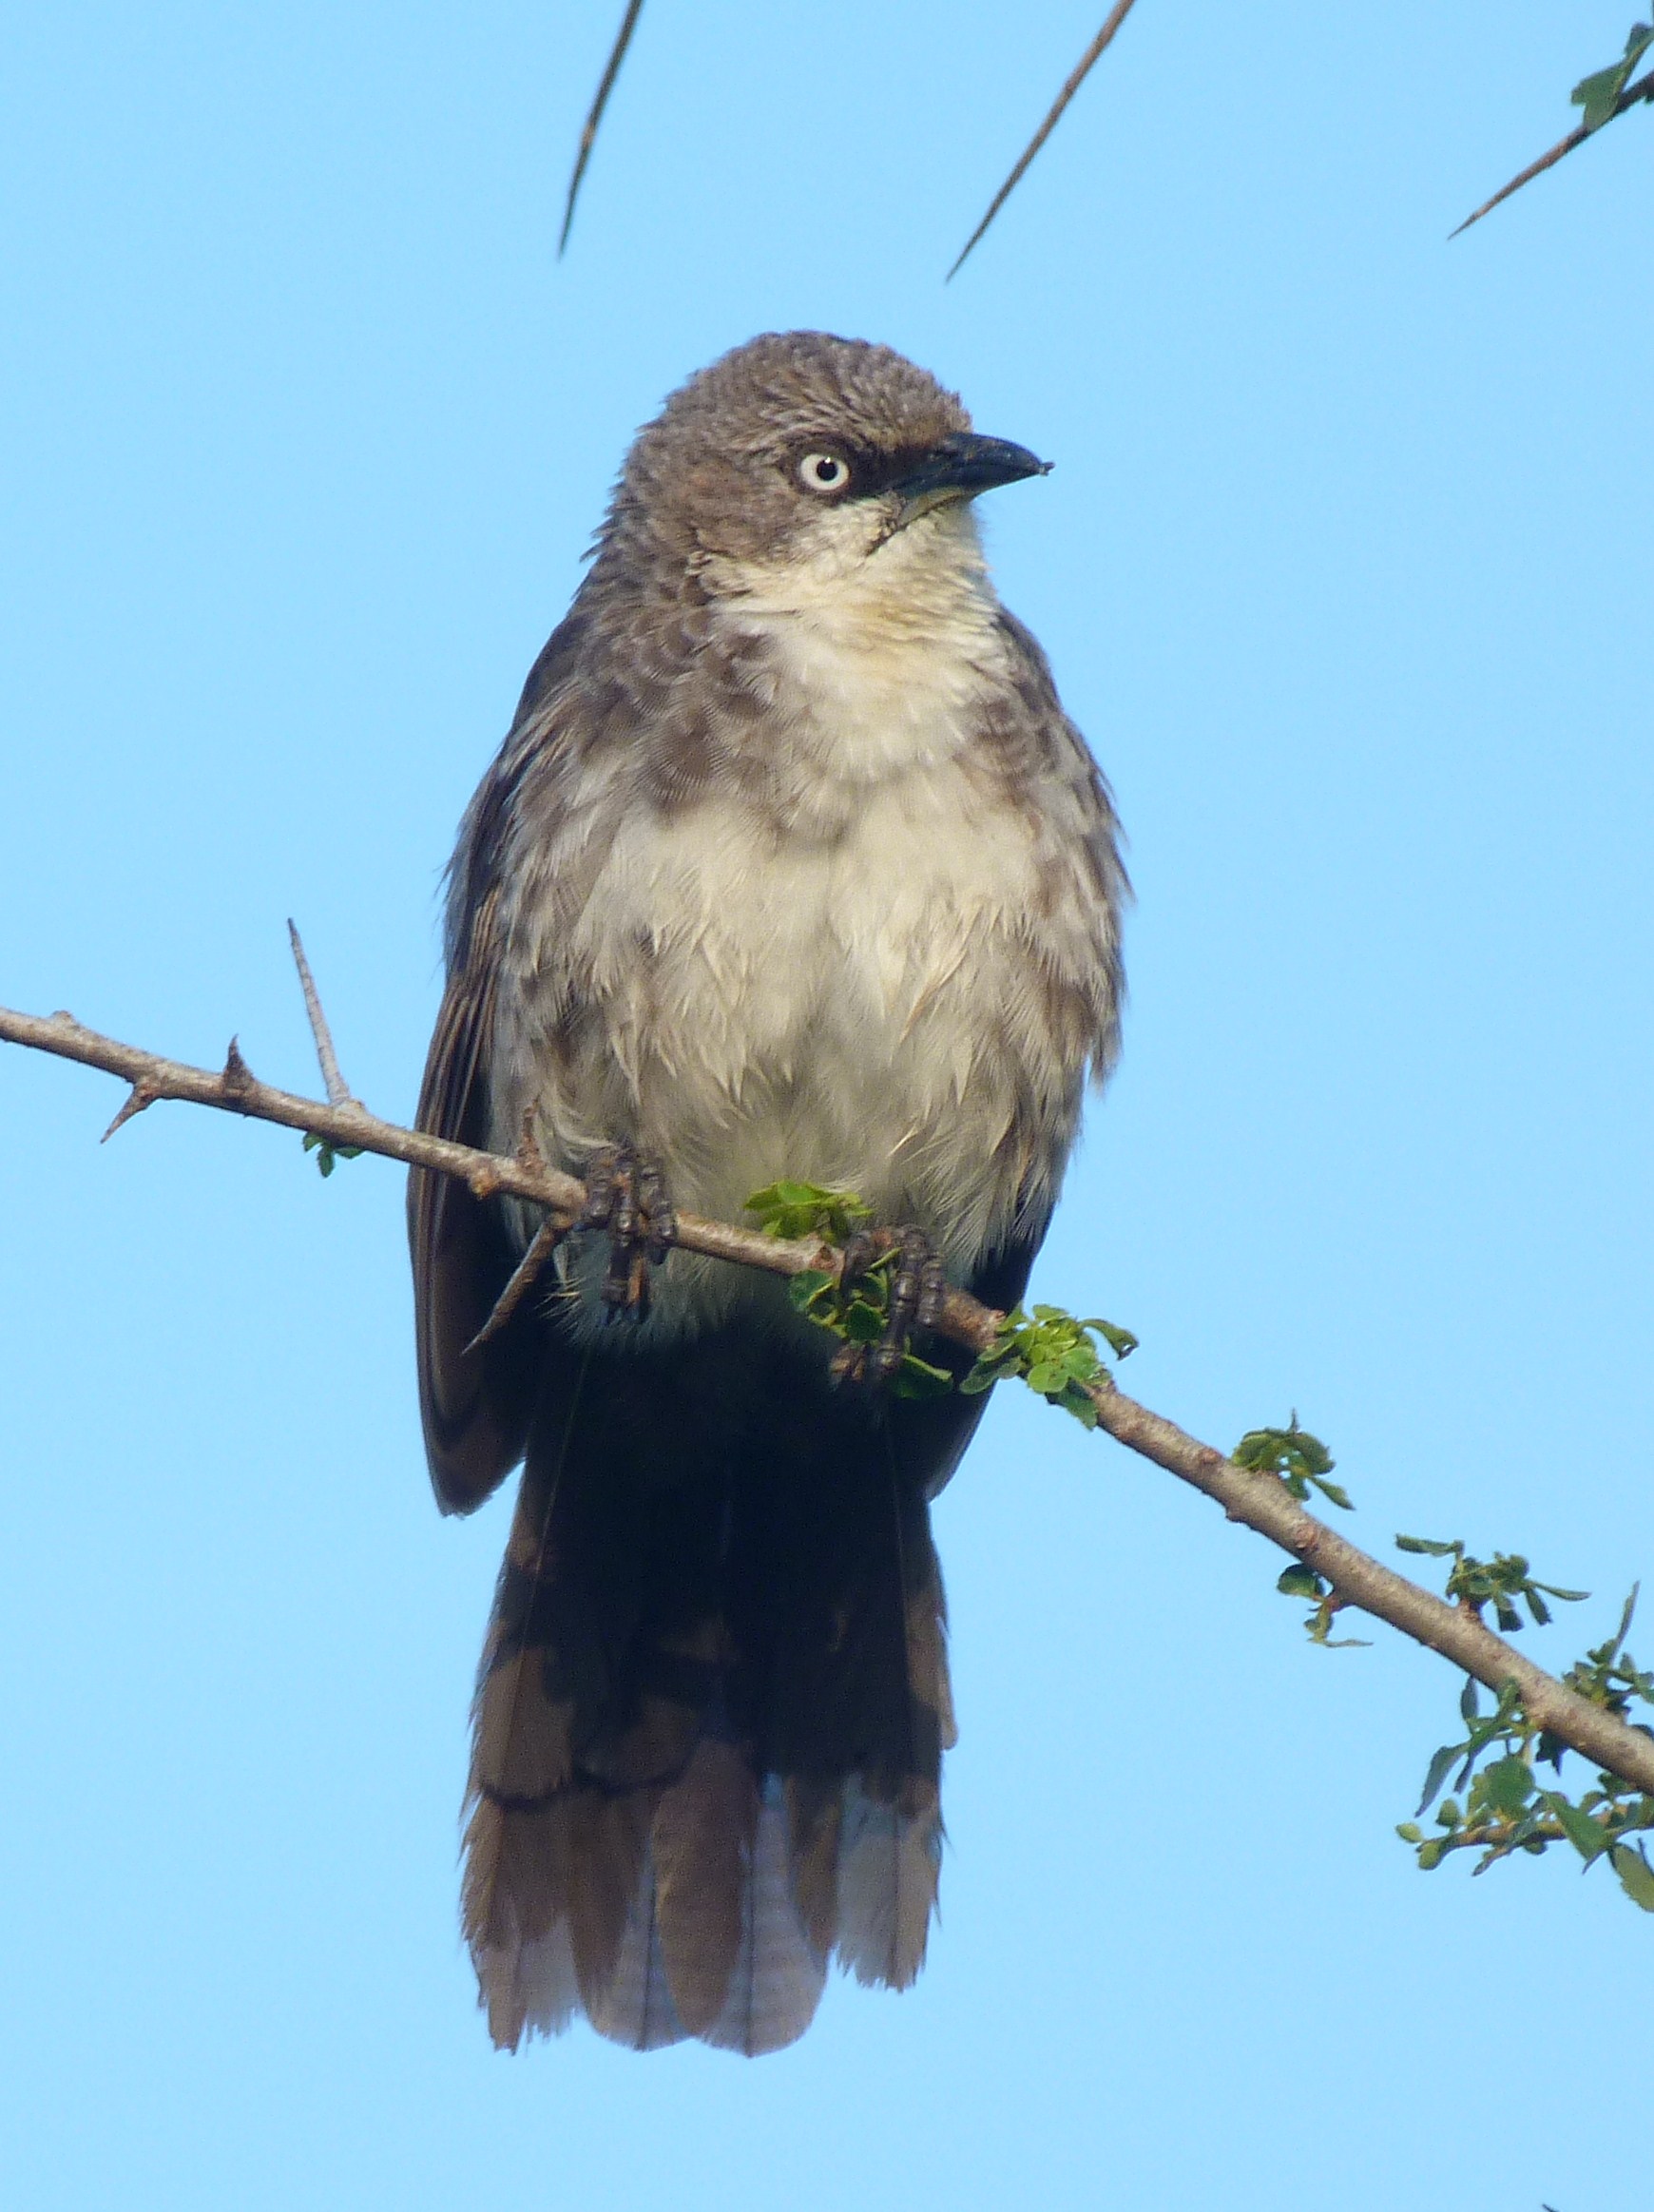 Image: Northern Pied Babbler (Turdoides hypoleuca) can be found in many savannah areas in Northern Tanzania